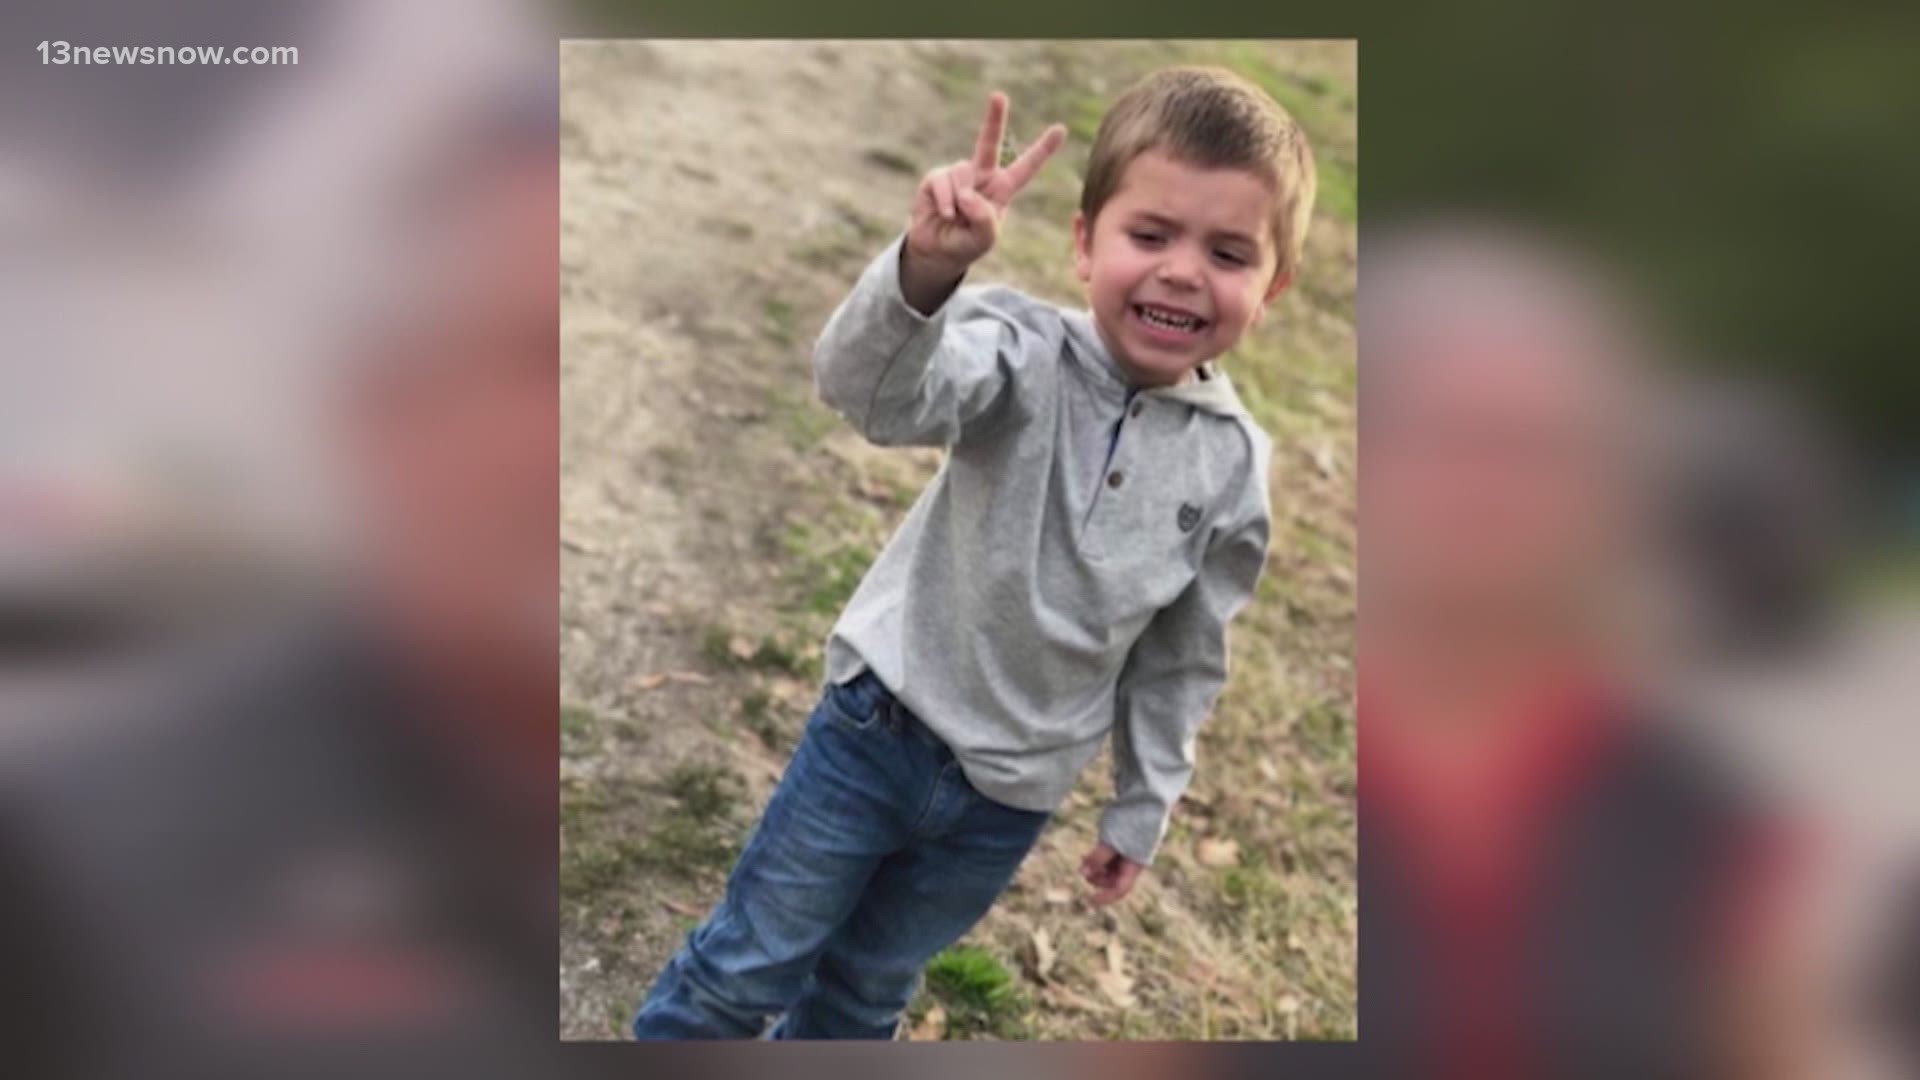 Cannon Hinnant was just five years old. His neighbor has been charged with murder.